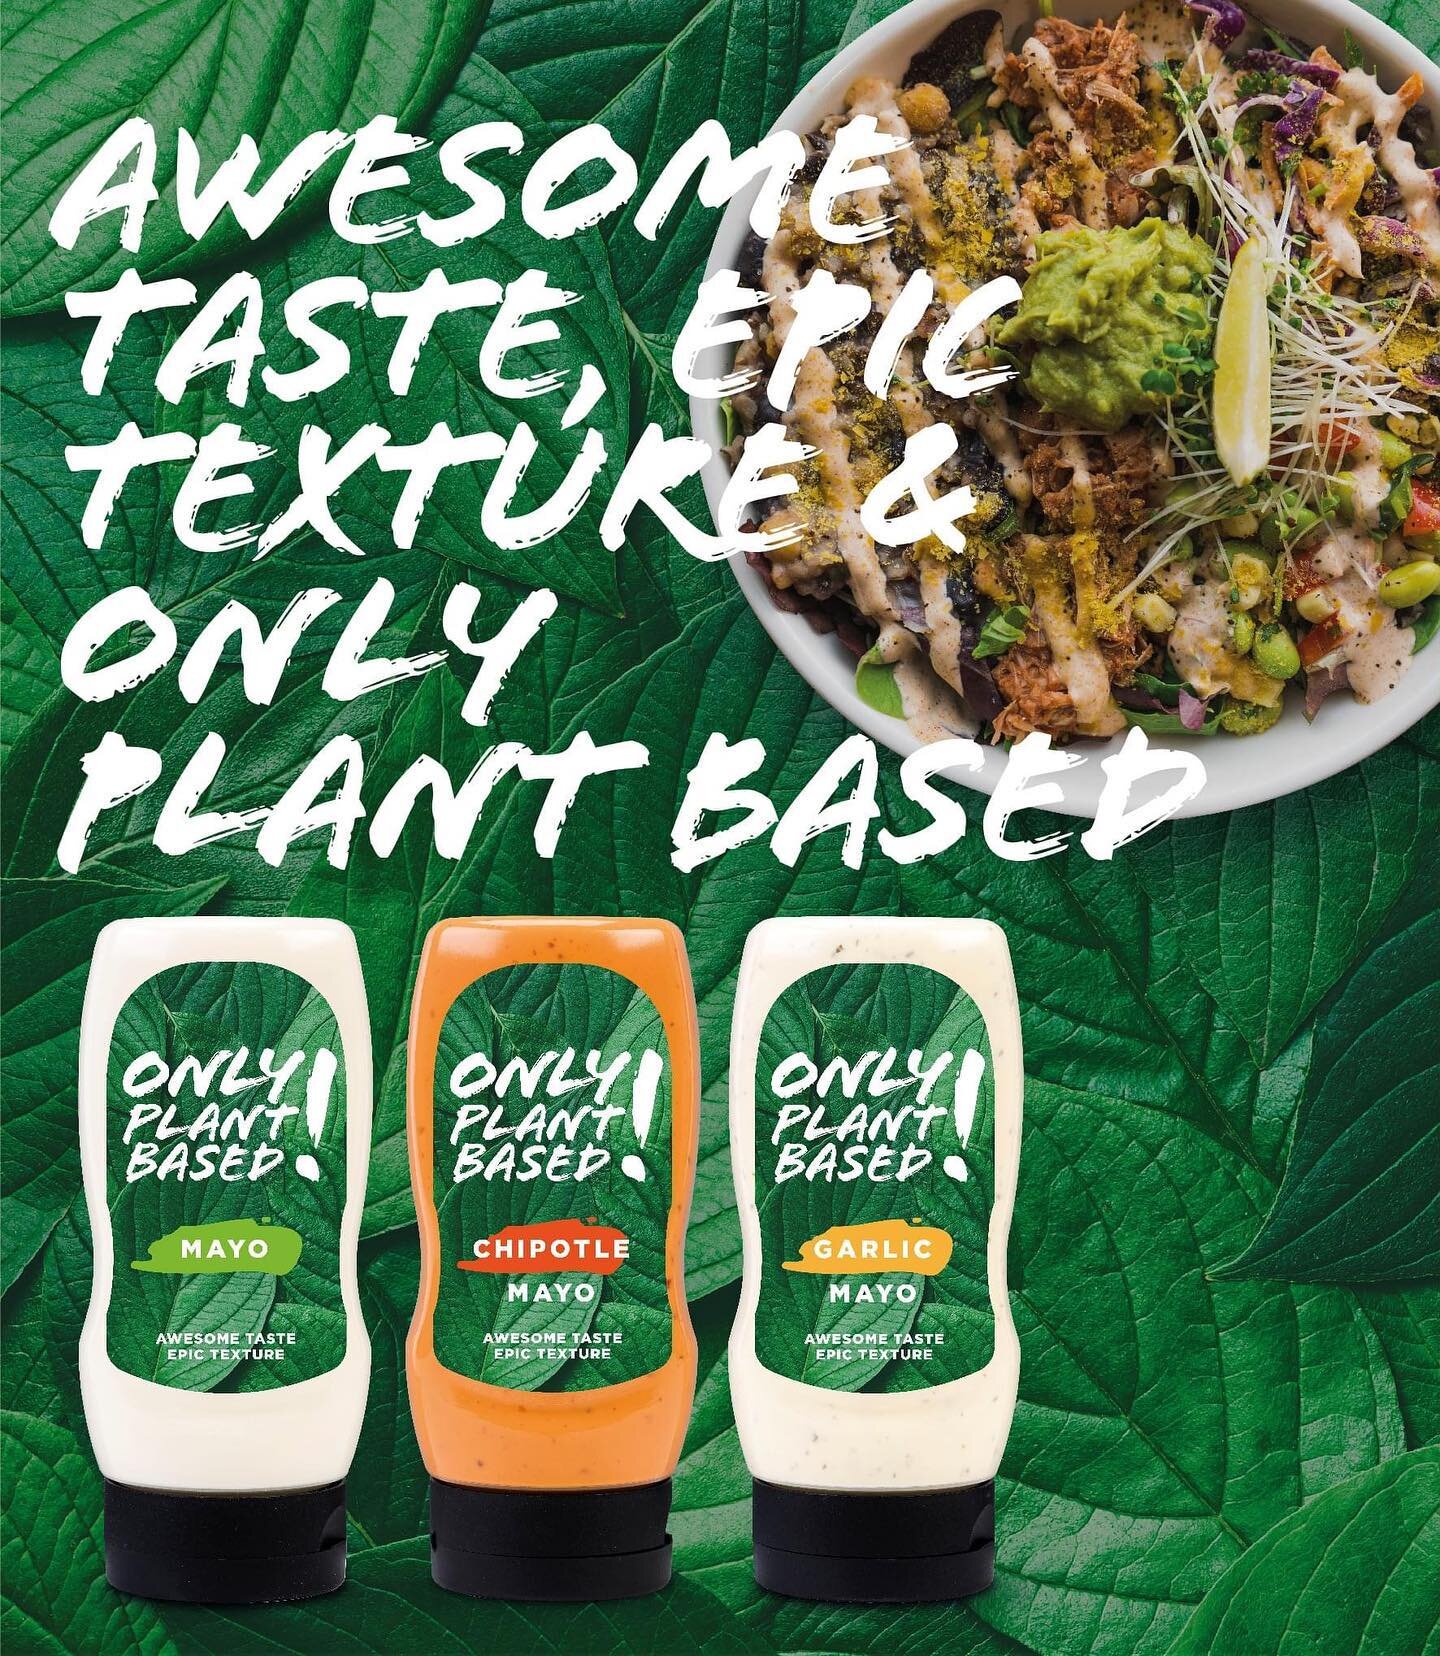 We continue to be blown away by the support and creativity of all our Itsonlyplantbased fans!

Thank you all so much for your support and for Helping us spread the word about our Only Plant Based Ranged 

#itsonlyplantbased #onlyplantbased #awardwinn